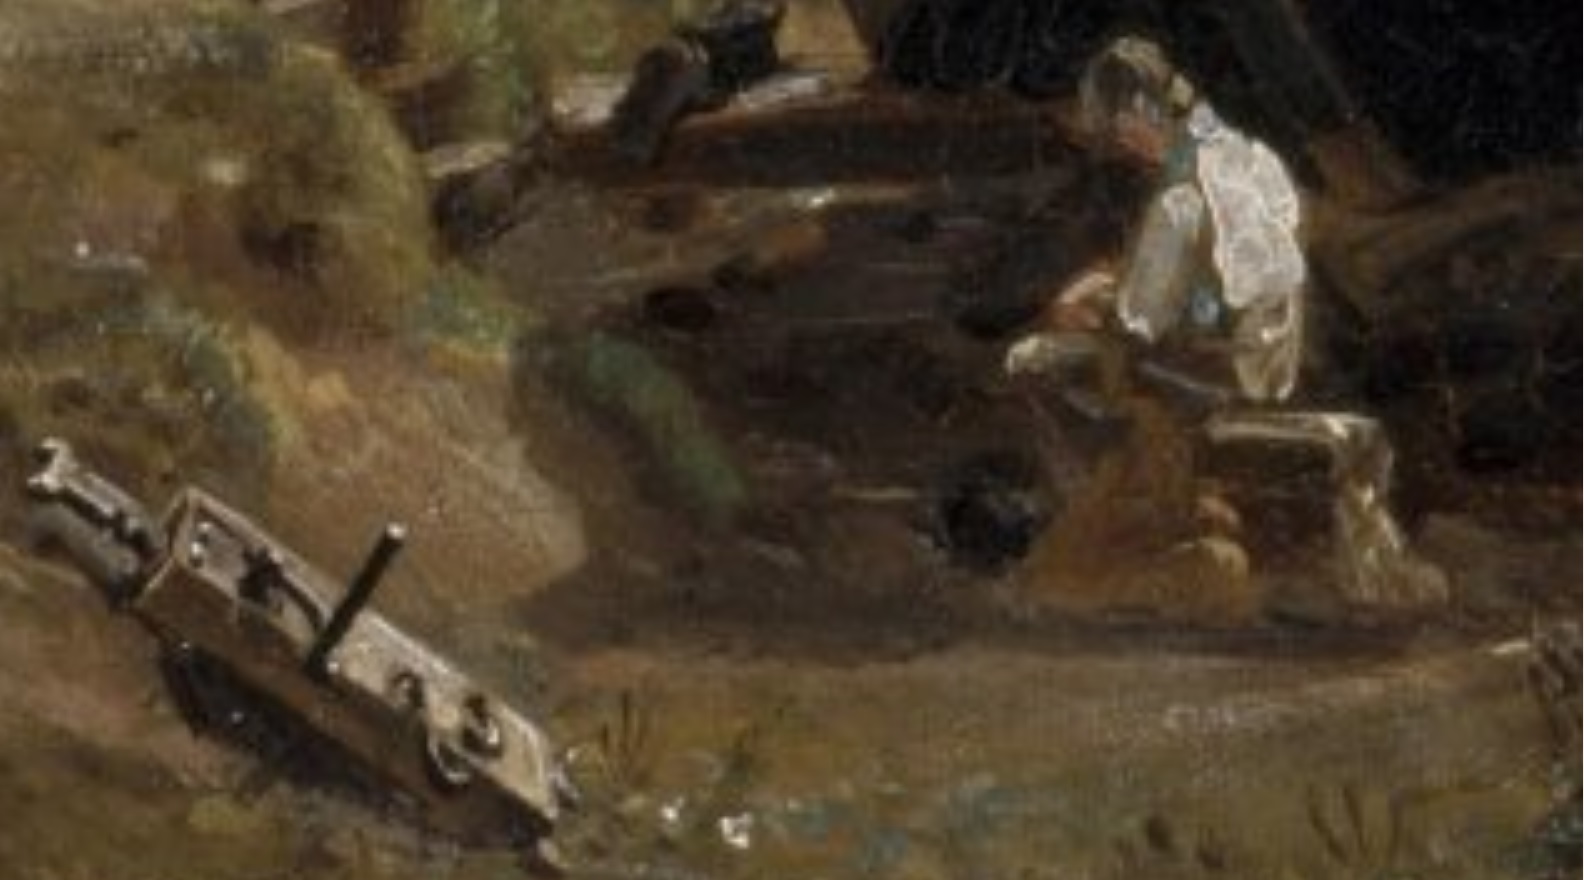 Boat Building near Flatford Mill painting by John Constable detail zoom in 1.jpg